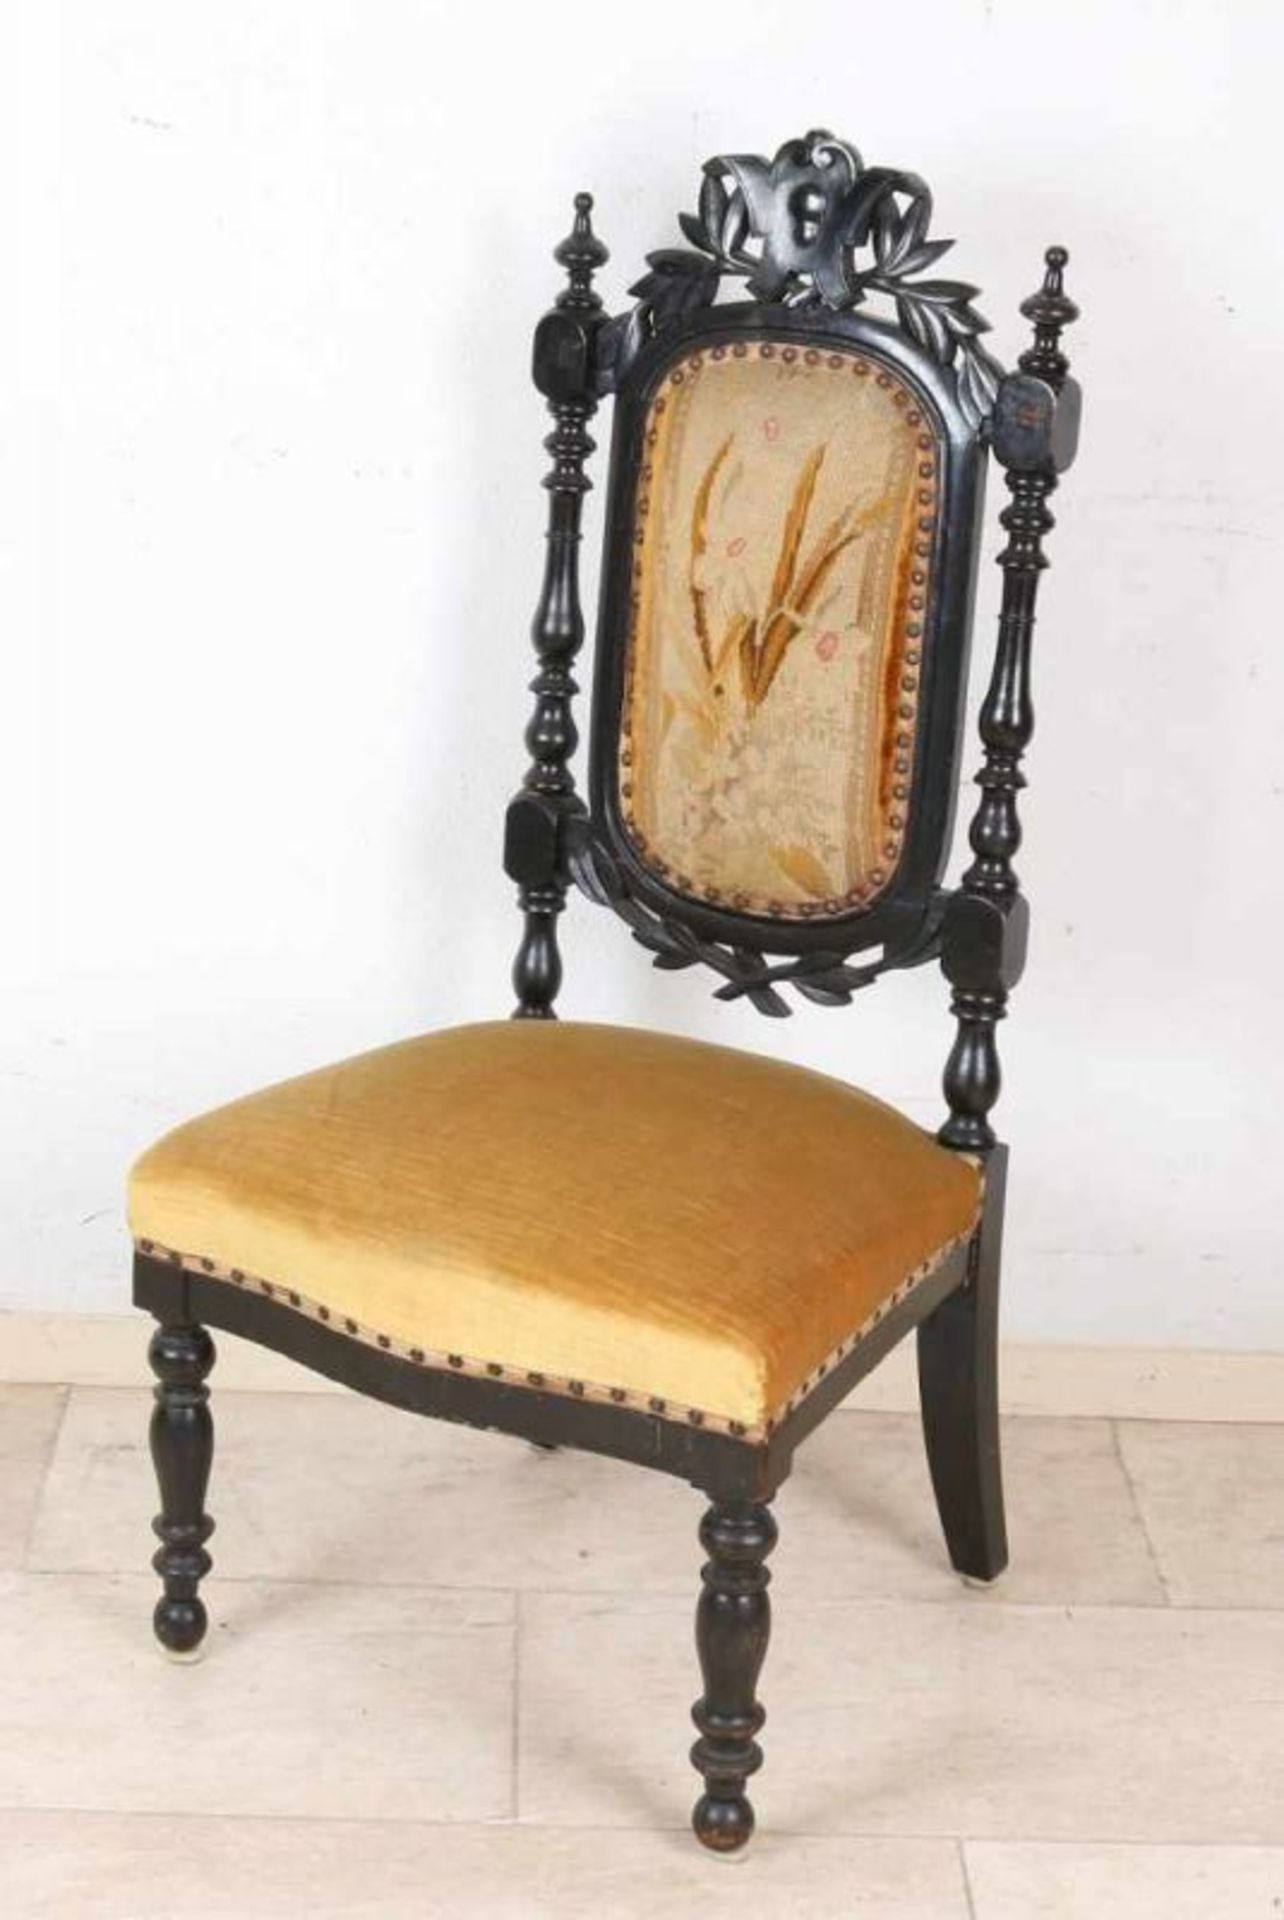 19th century French bonised wood carved knitting chair. Circa 1870. Dimensions: 99 x 40 x 50 cm.